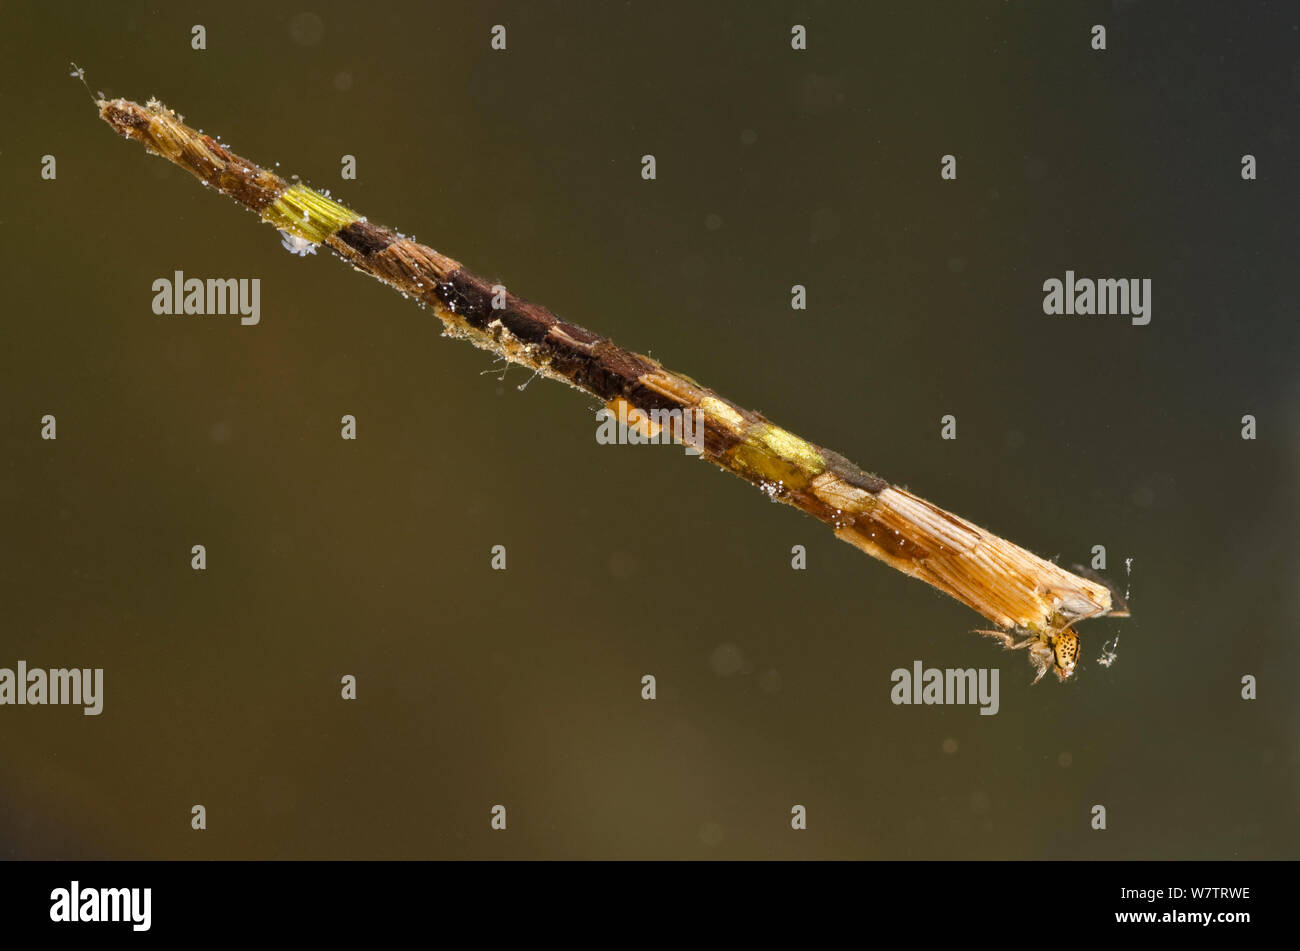 Case-building caddisfly larva (Leptoceridae) Europe, July, controlled conditions Stock Photo